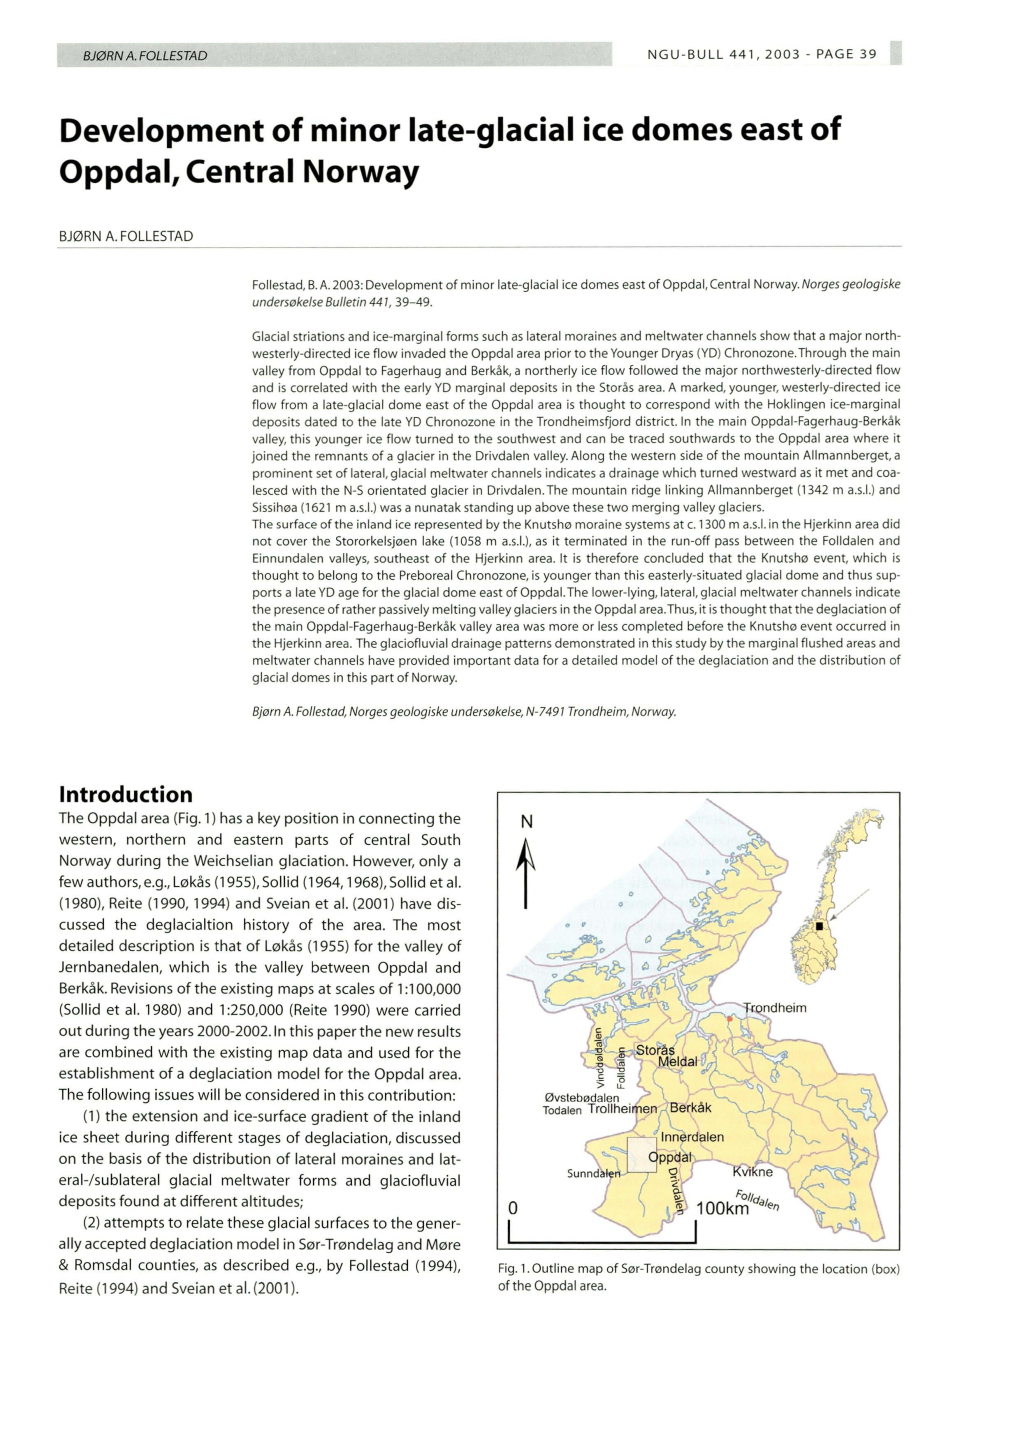 Development of Minor Late-Glacial Ice Domes East of Oppdal, Central Norway